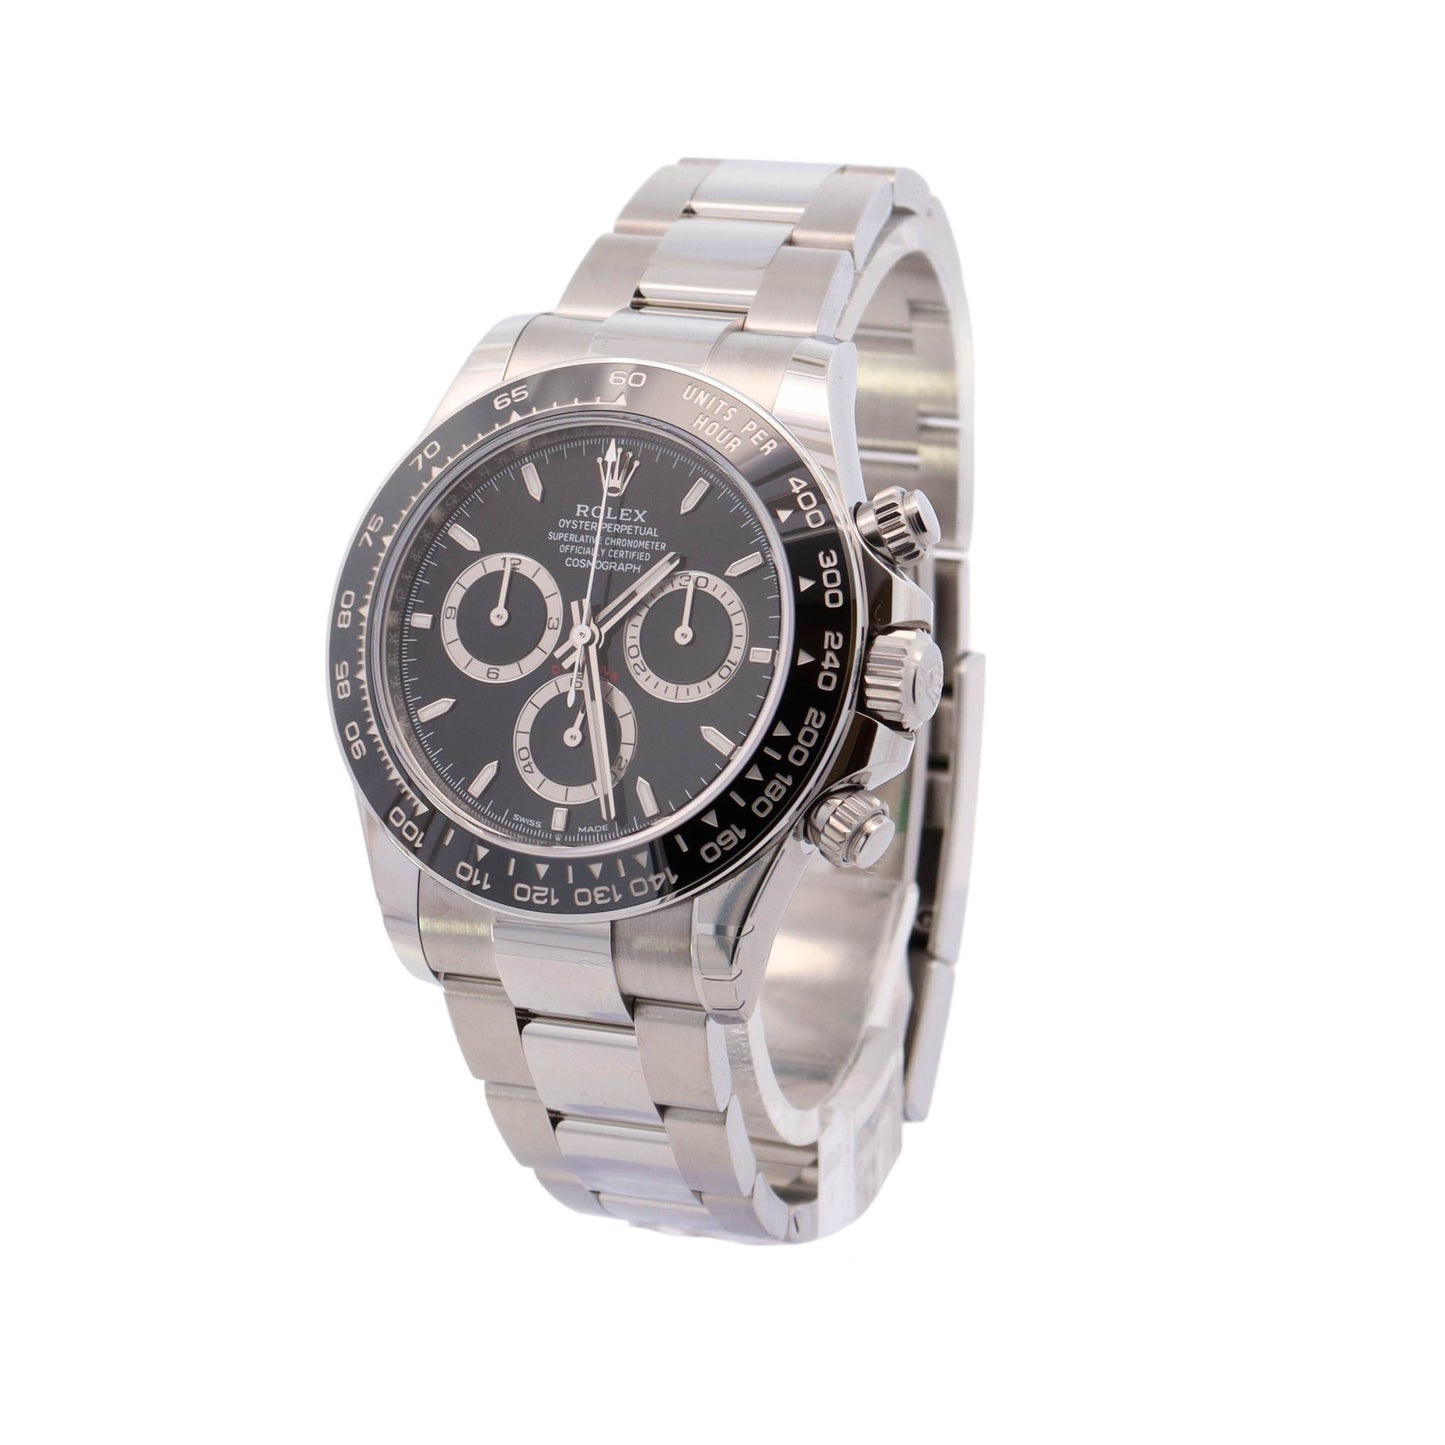 Rolex Daytona 40mm Stainless Steel Black Chronograph Dial Watch Reference #: 126500LN